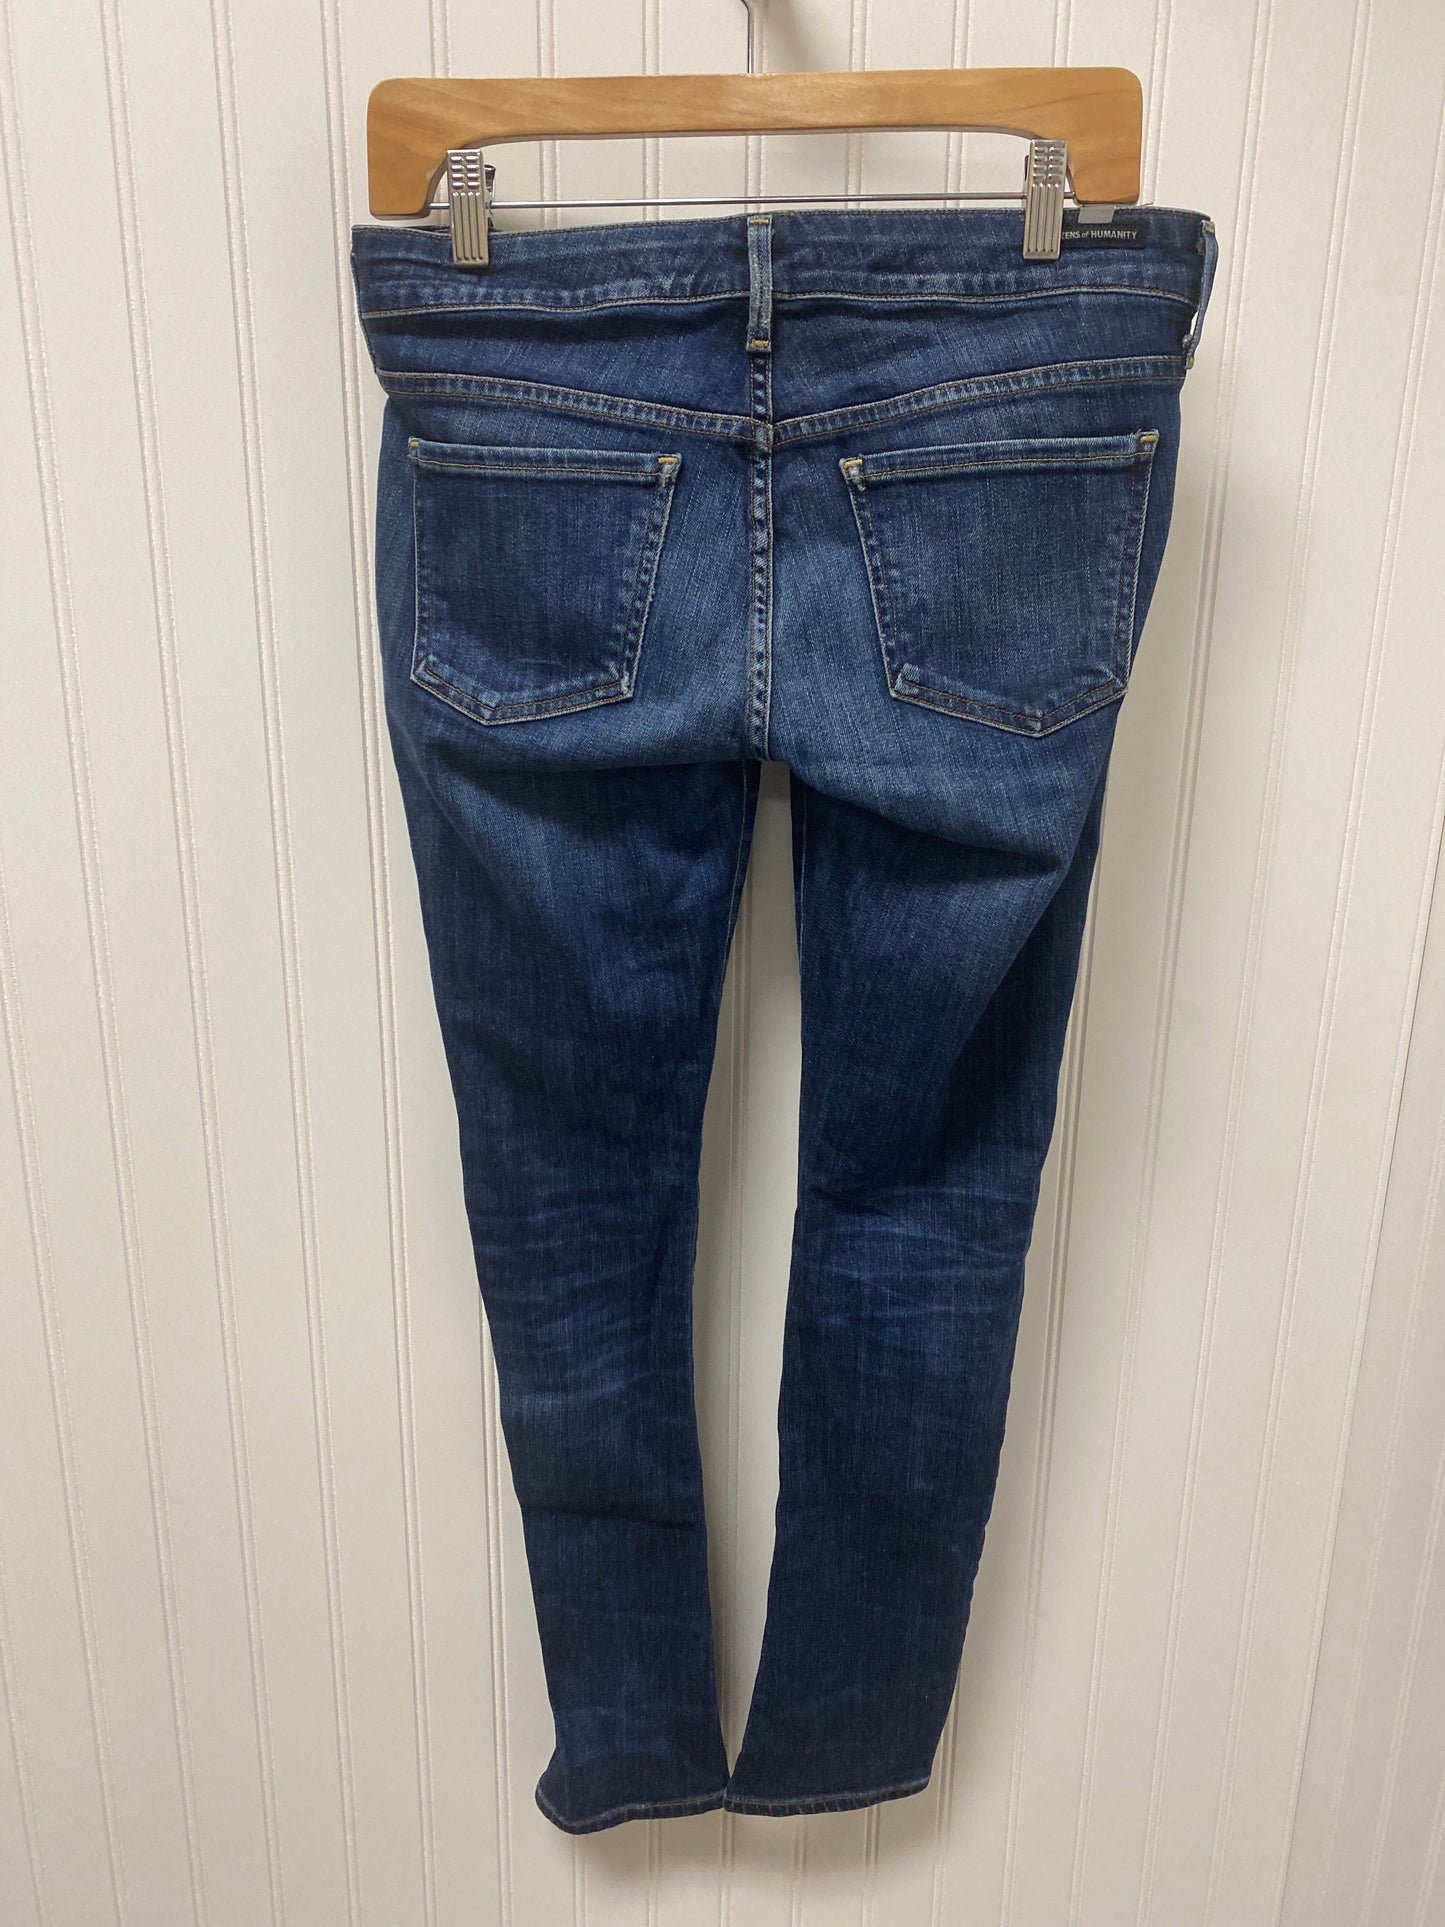 Jeans Designer By Citizens Of Humanity  Size: 6